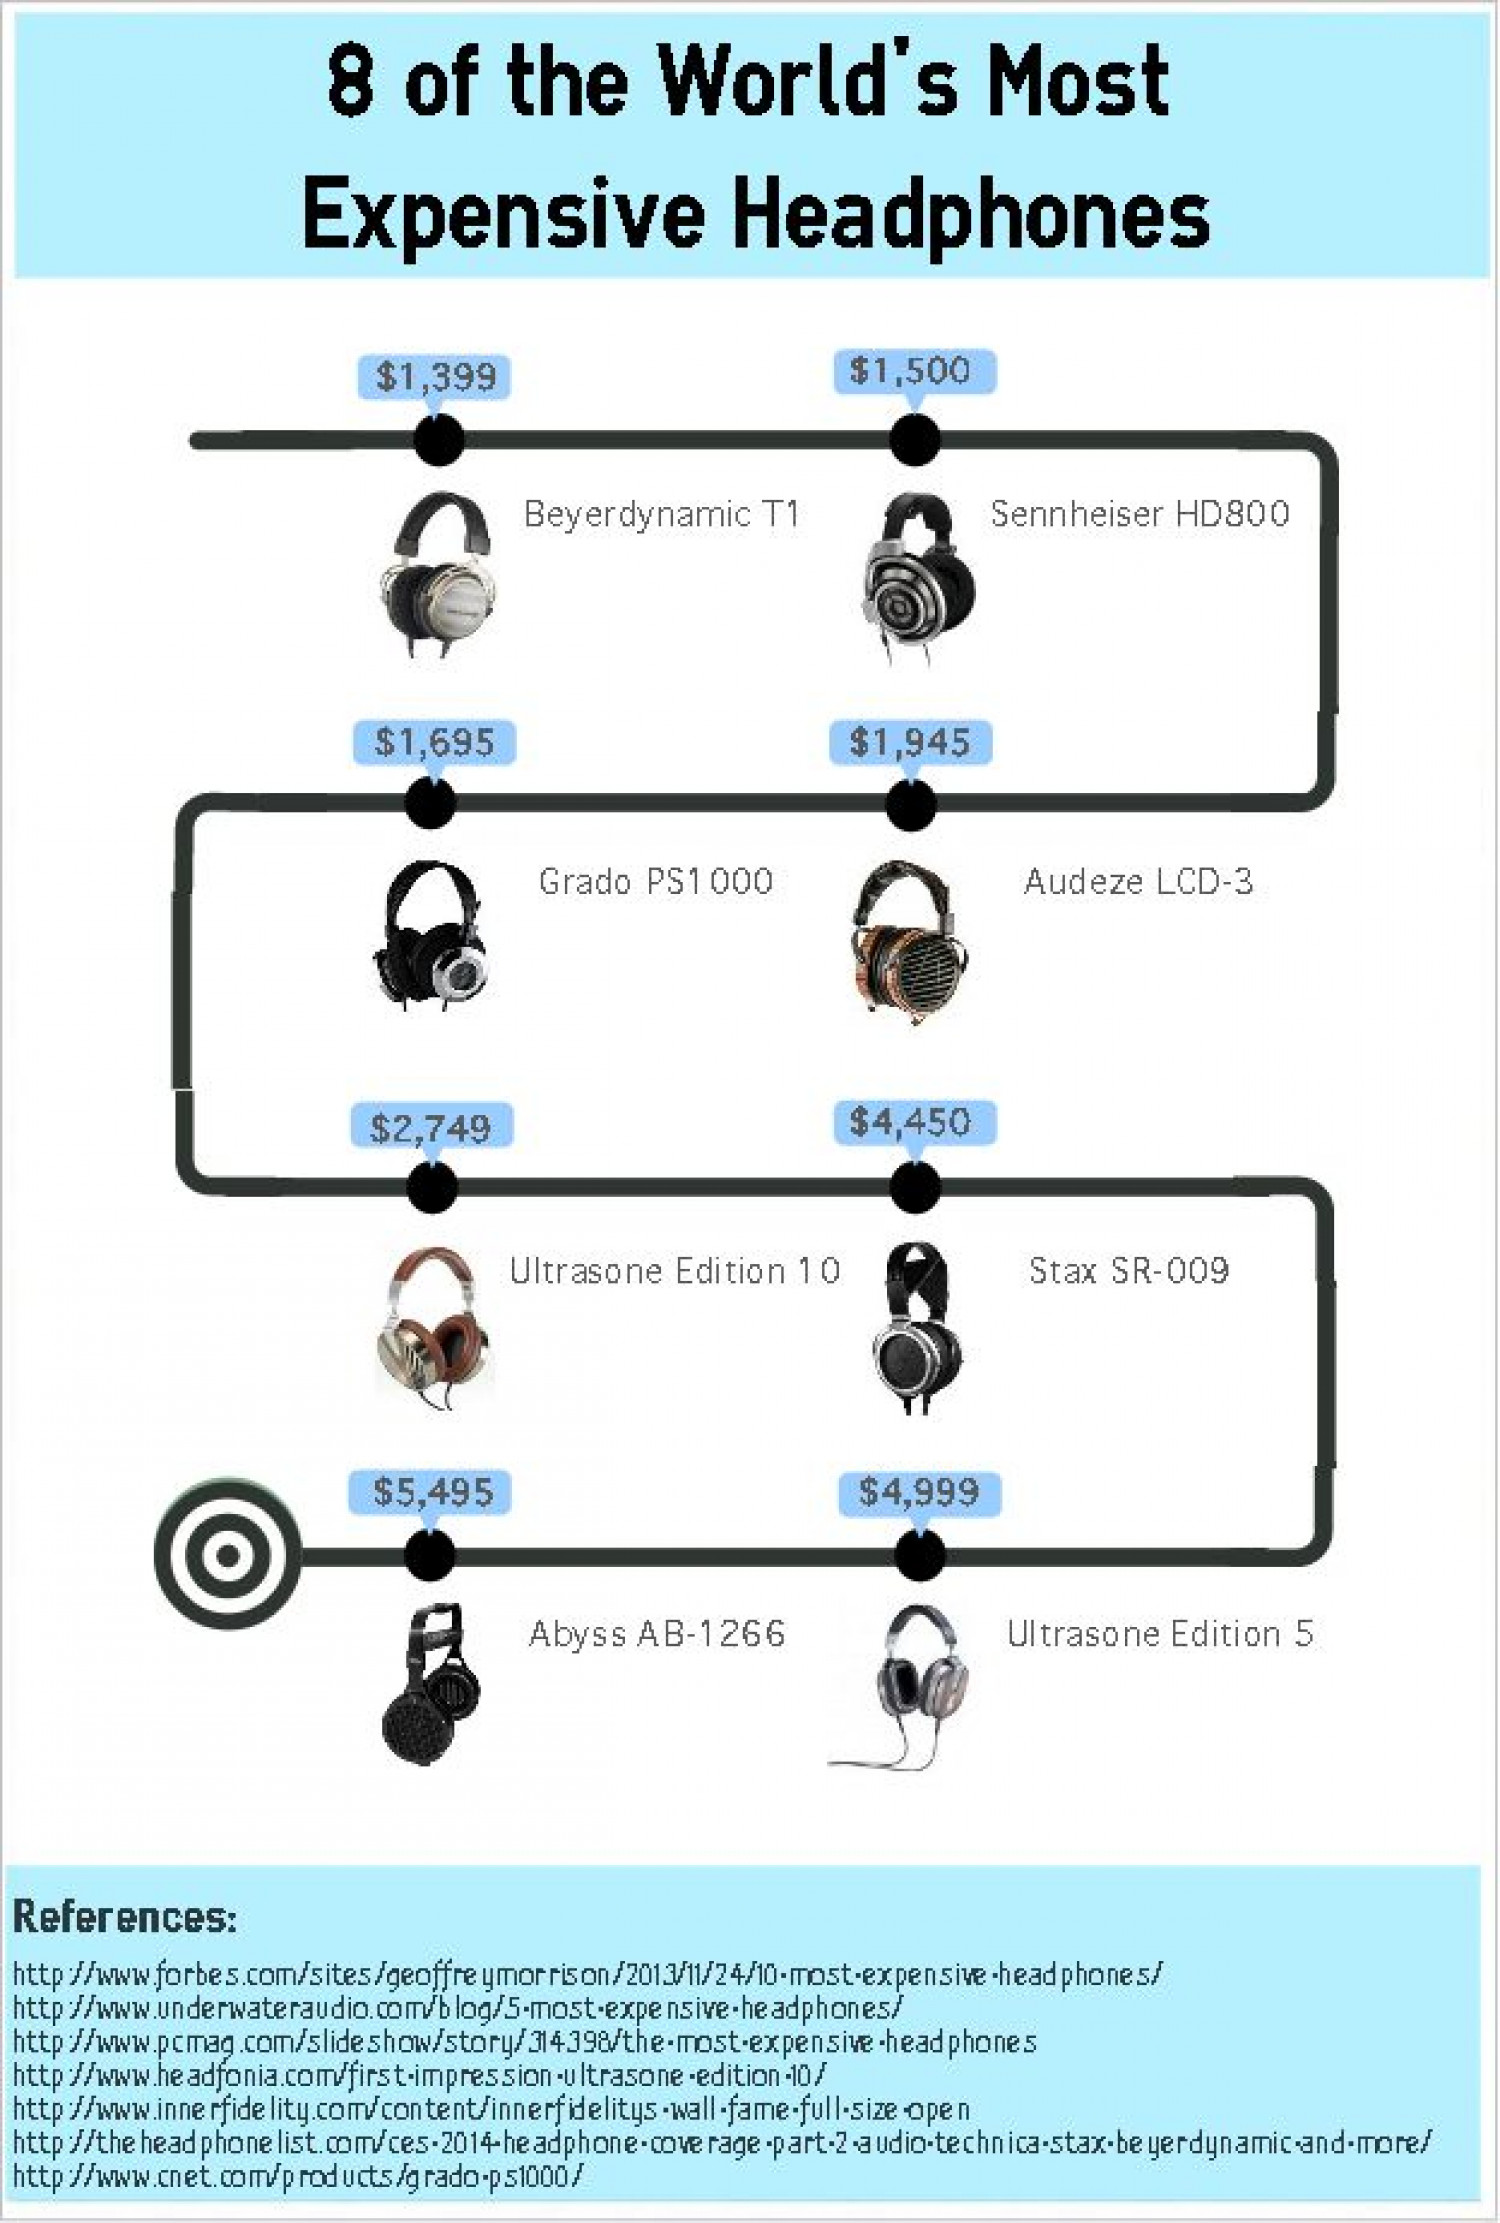 8 of the World’s Most Expensive Headphones Infographic